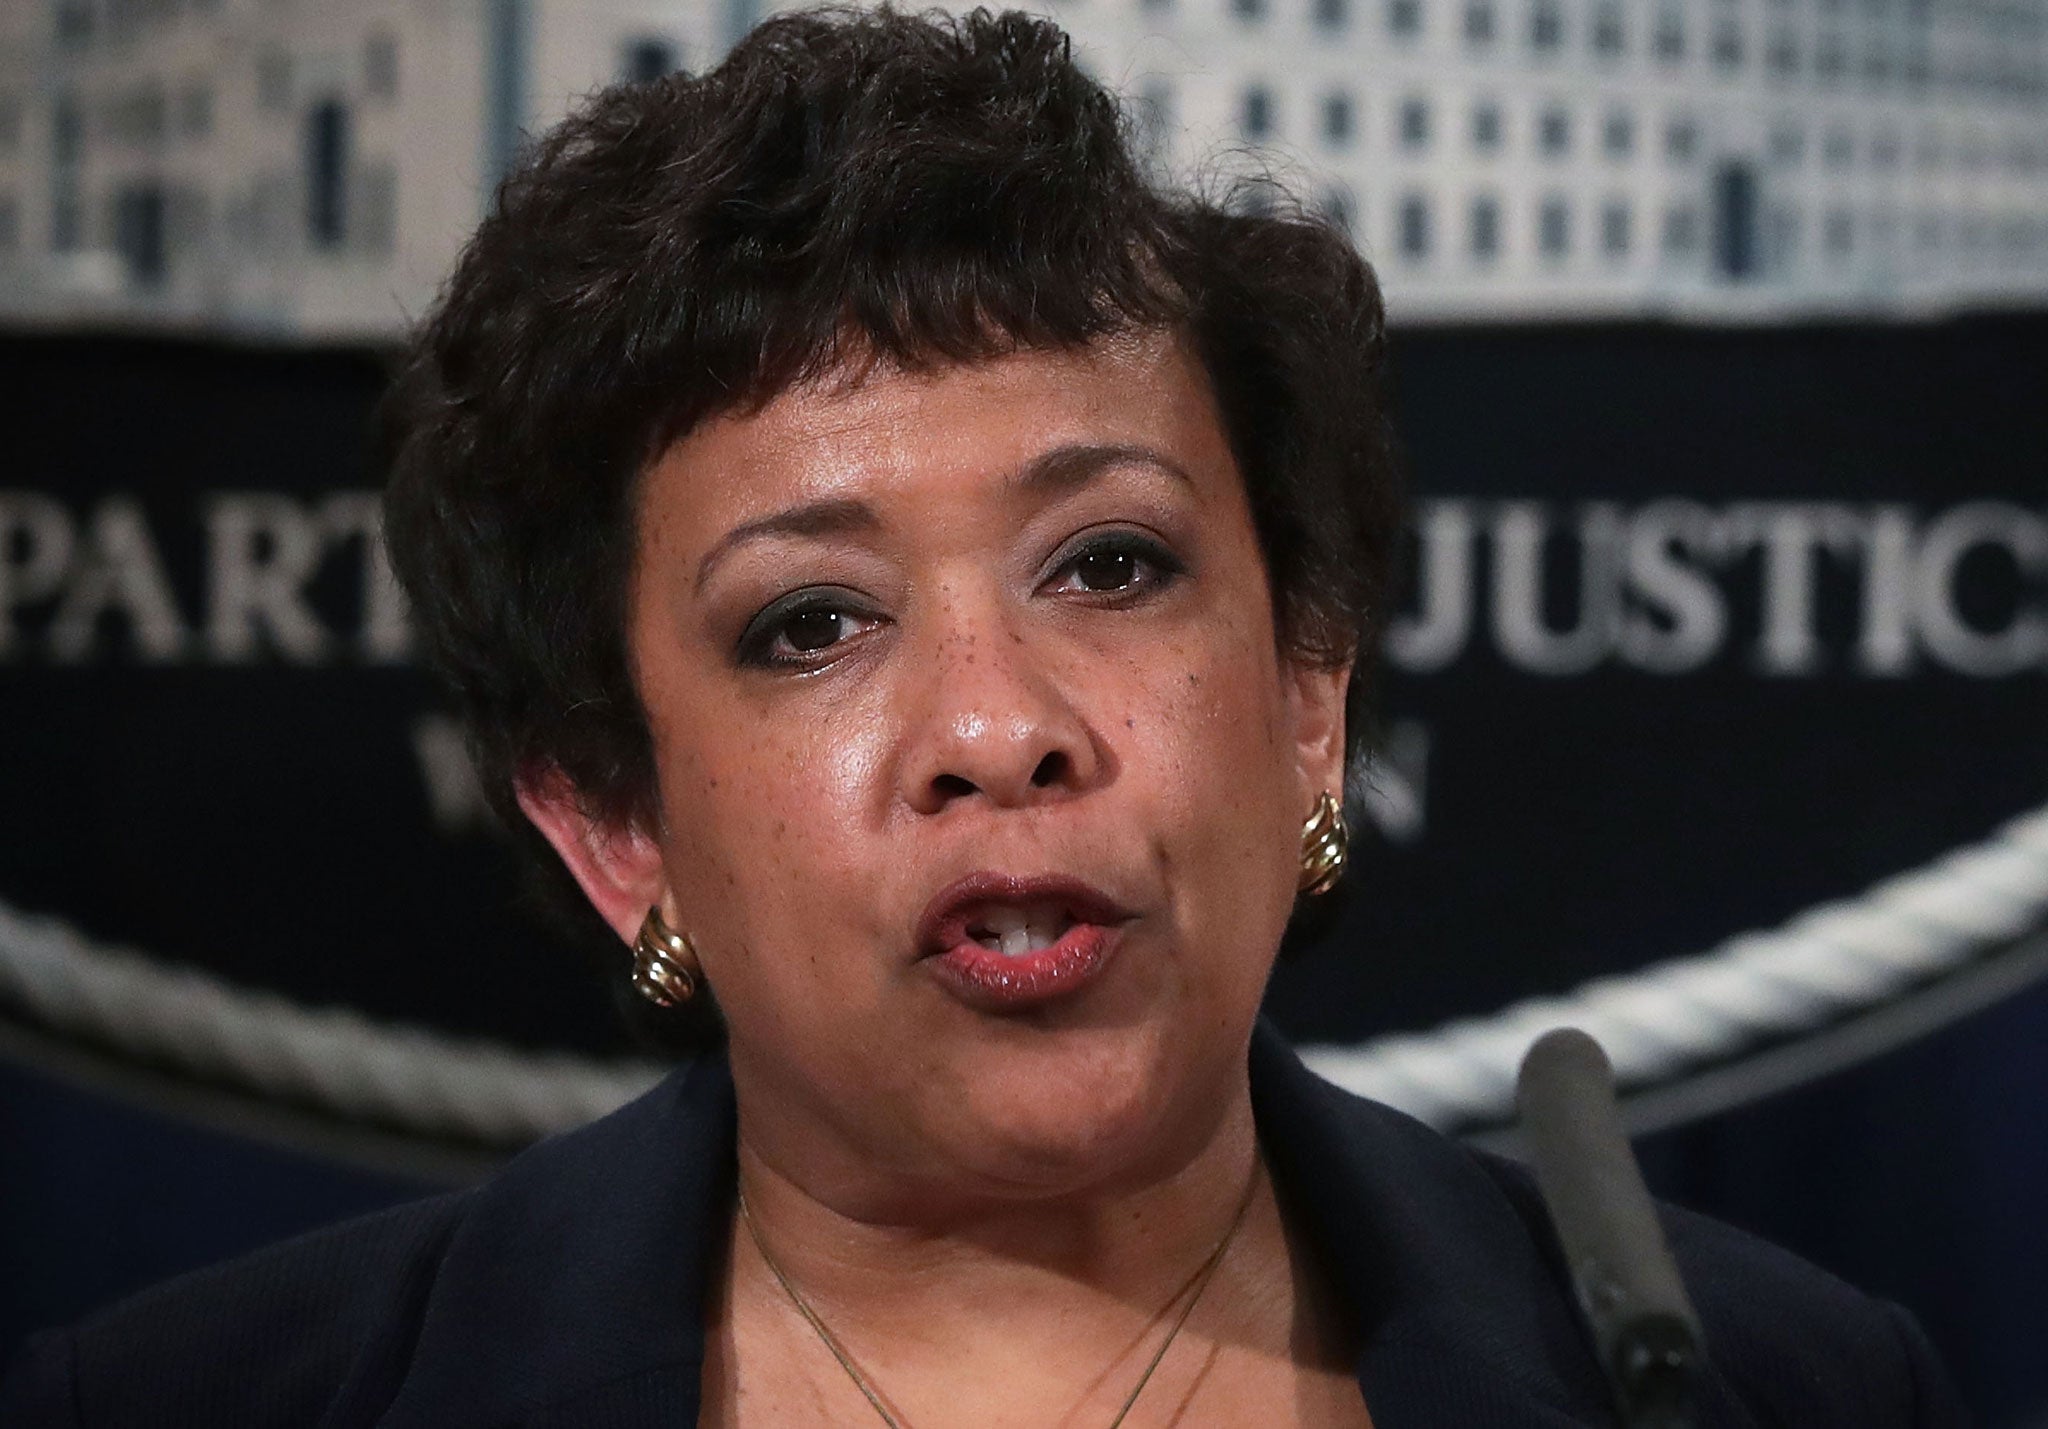 US Attorney General Loretta Lynch has vowed 'to root out misconduct and to bring wrongdoers to justice'